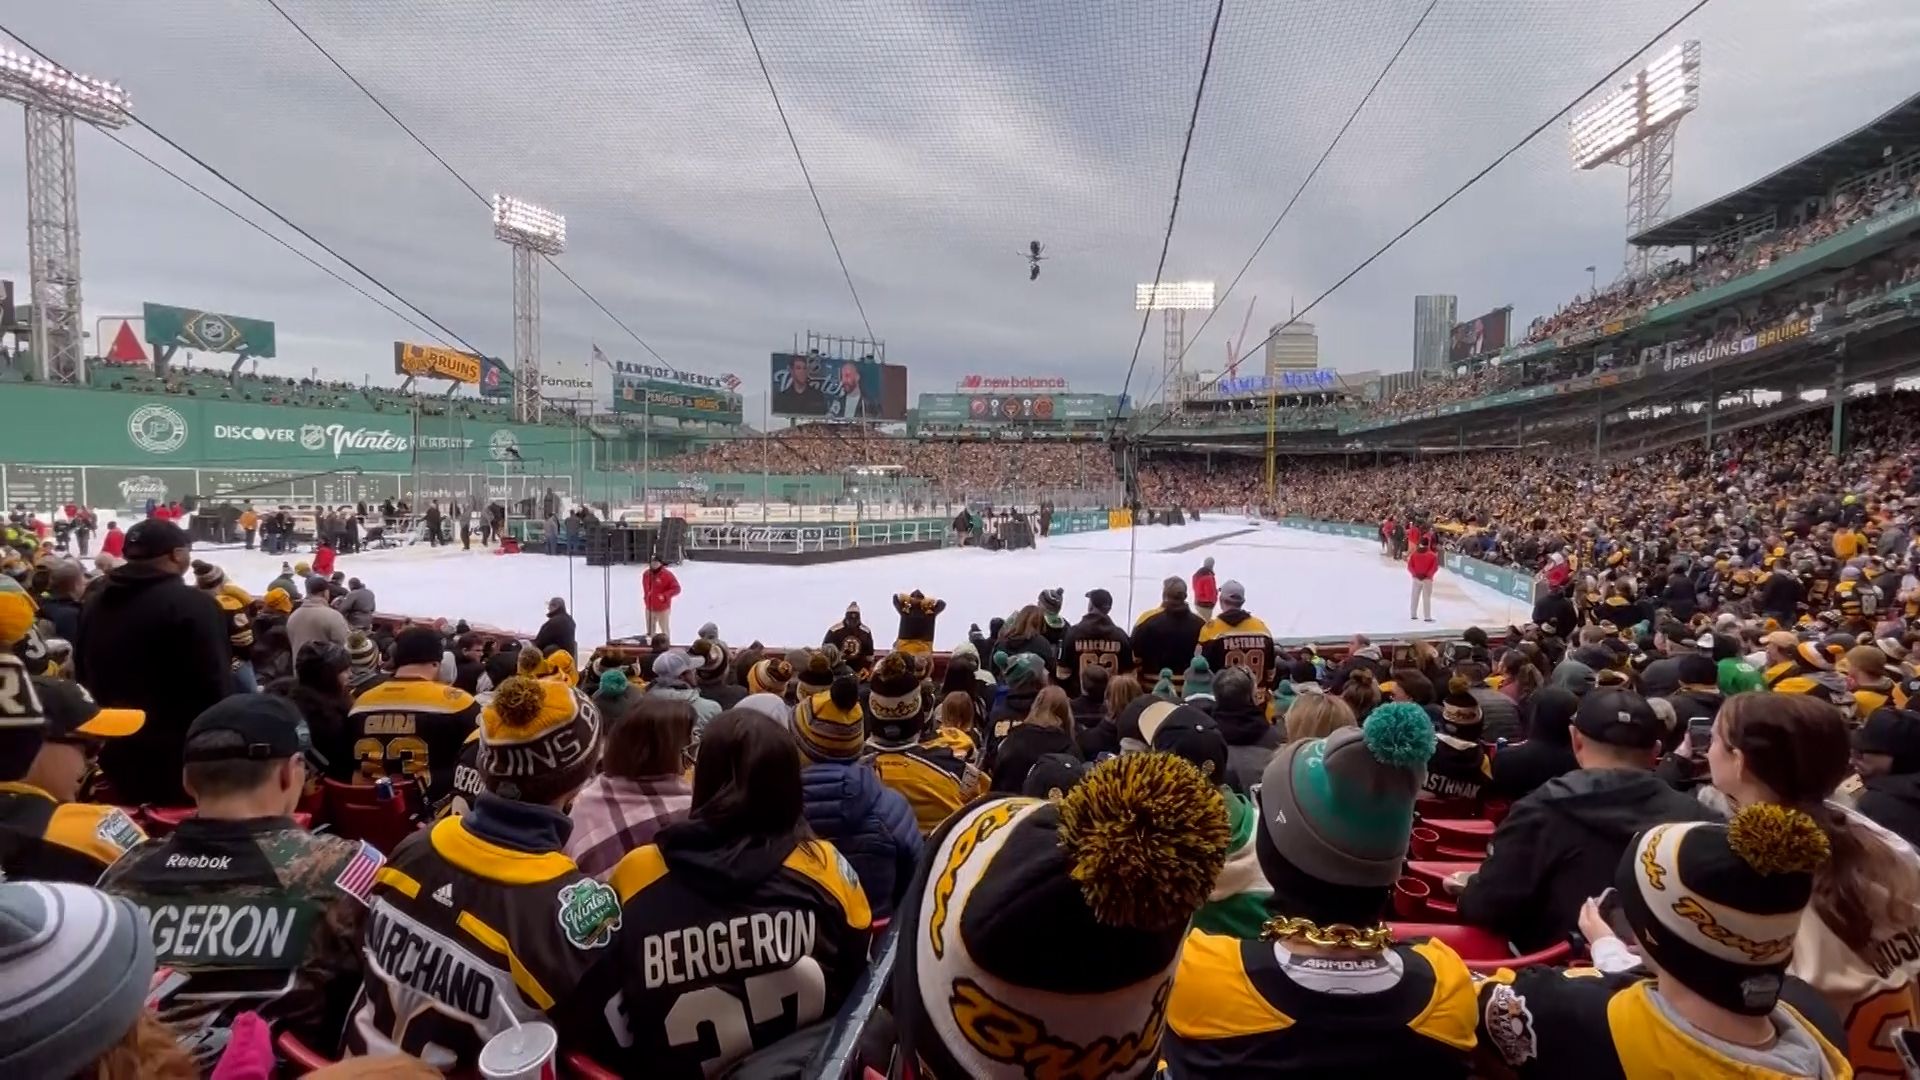 2023 Winter Classic at Fenway Park Pittsburgh vs Boston, Page 4